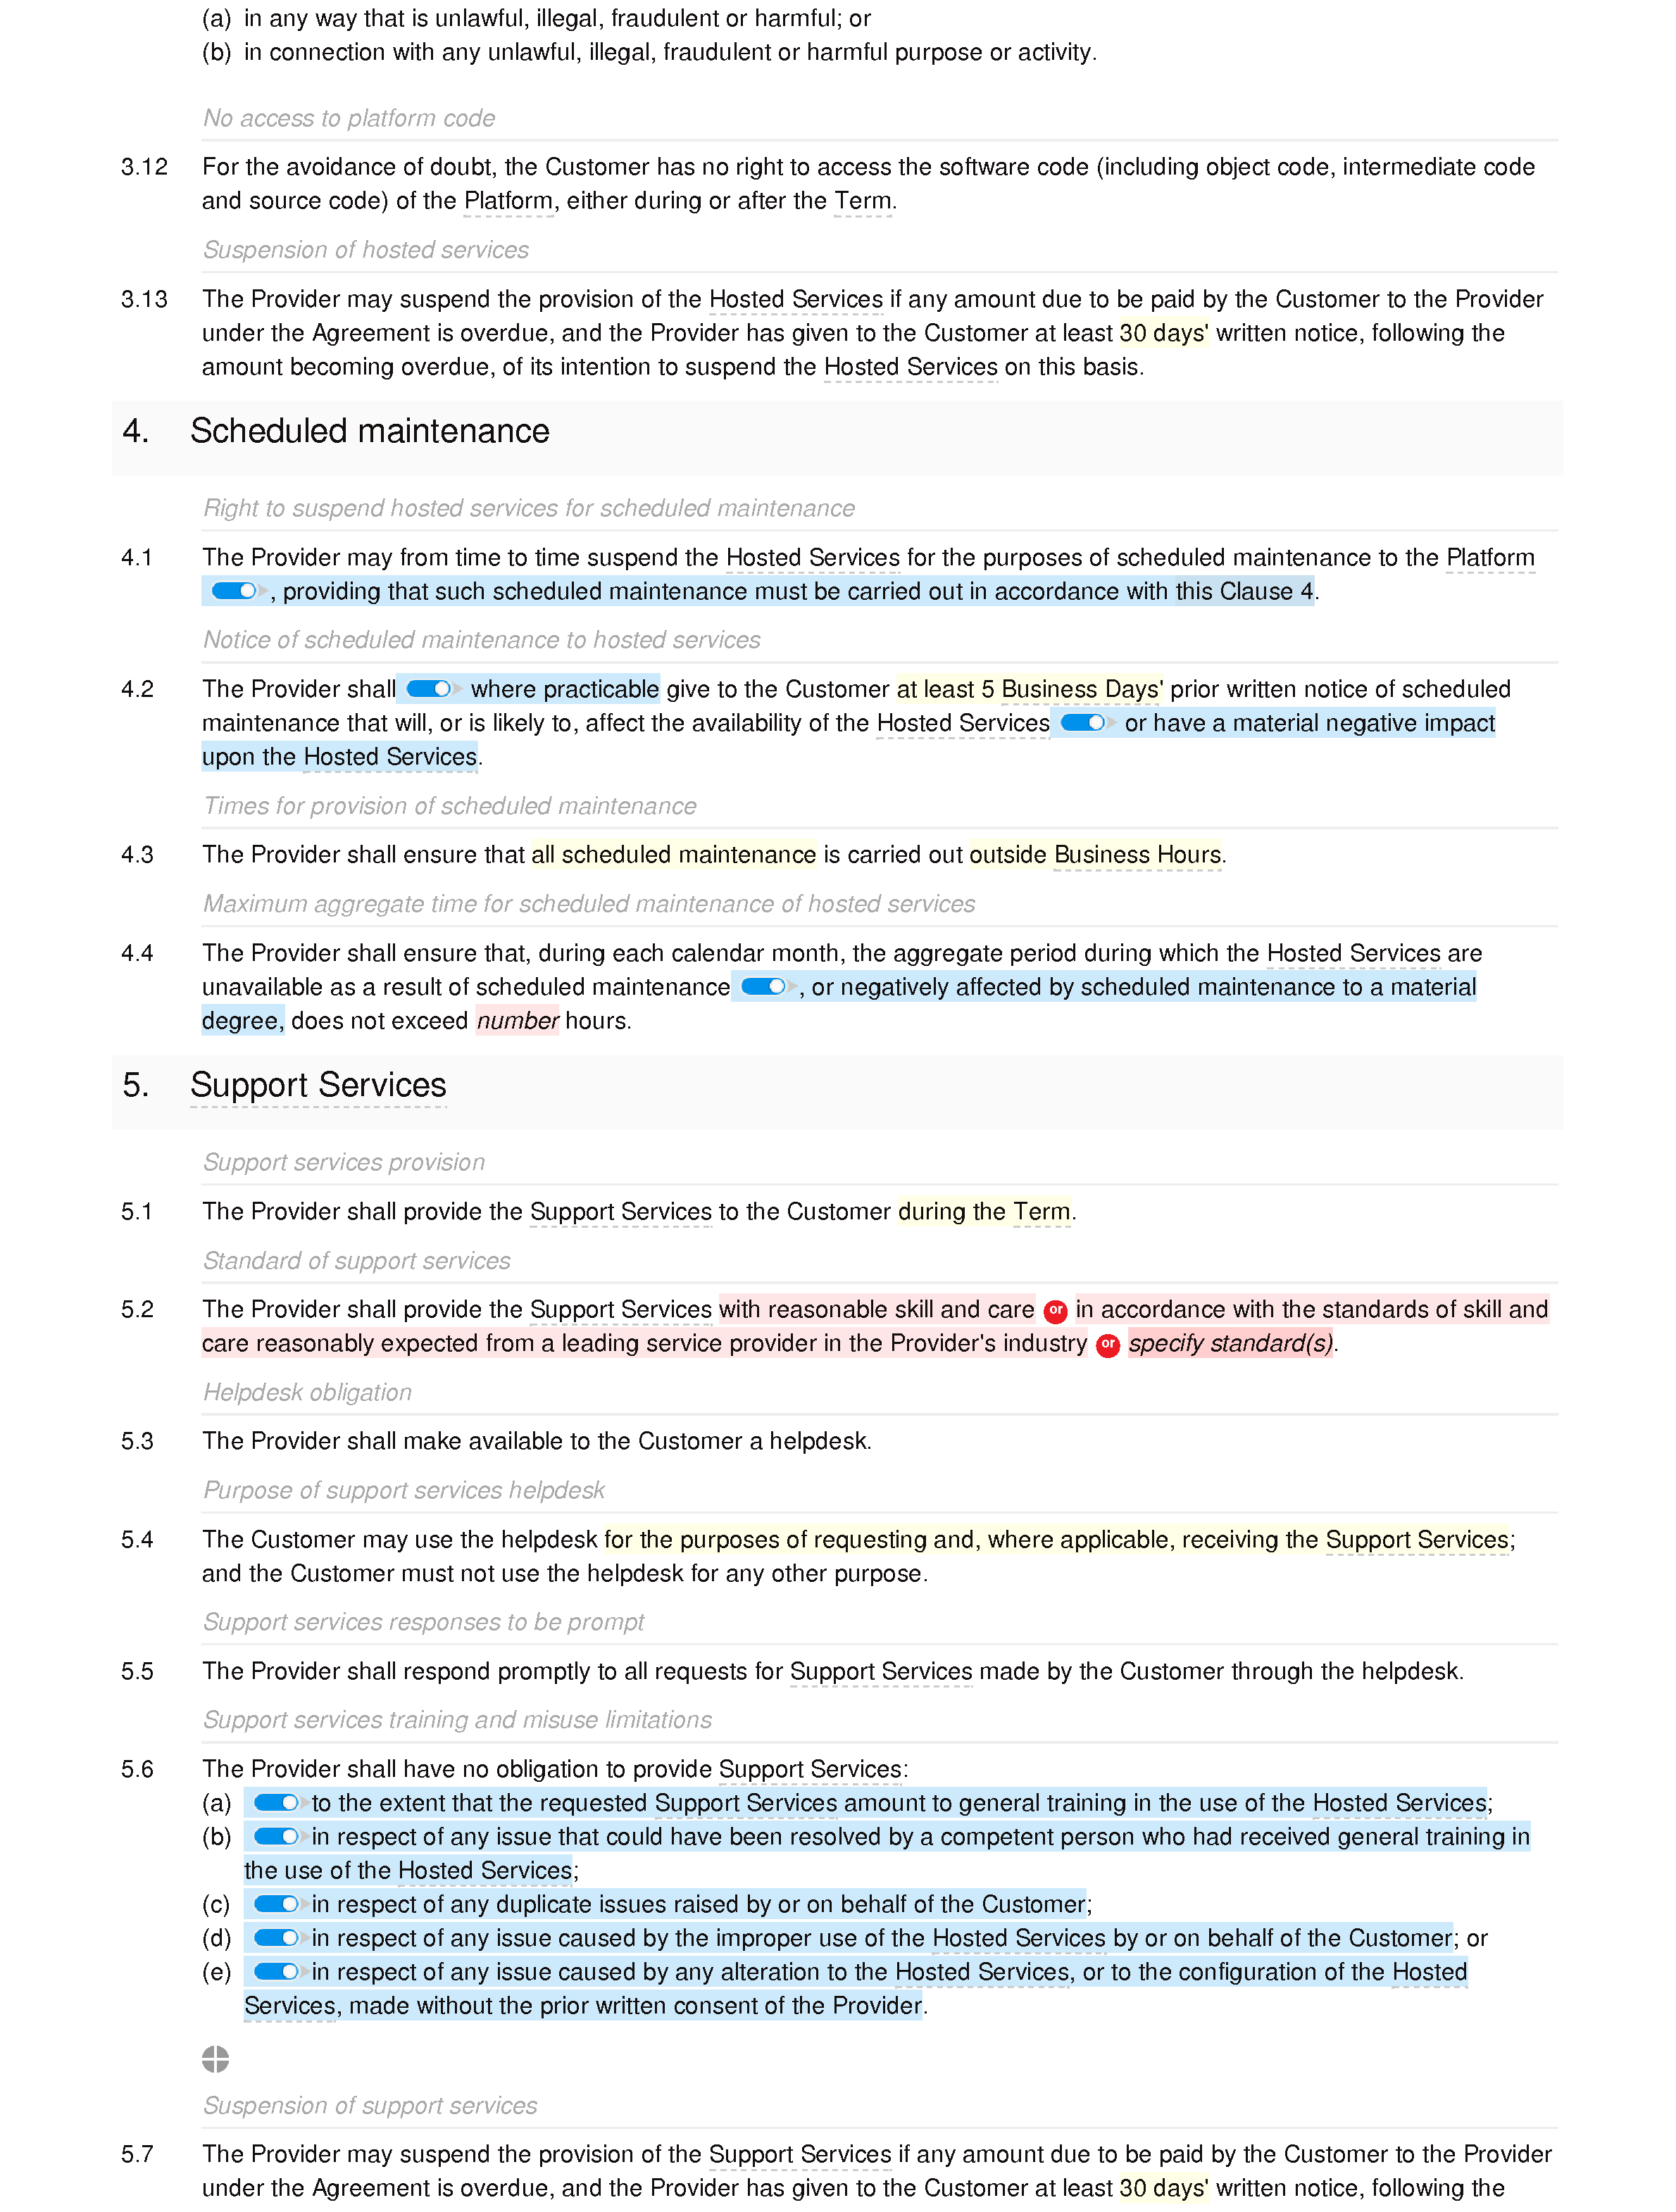 SaaS terms and conditions (basic) document editor preview